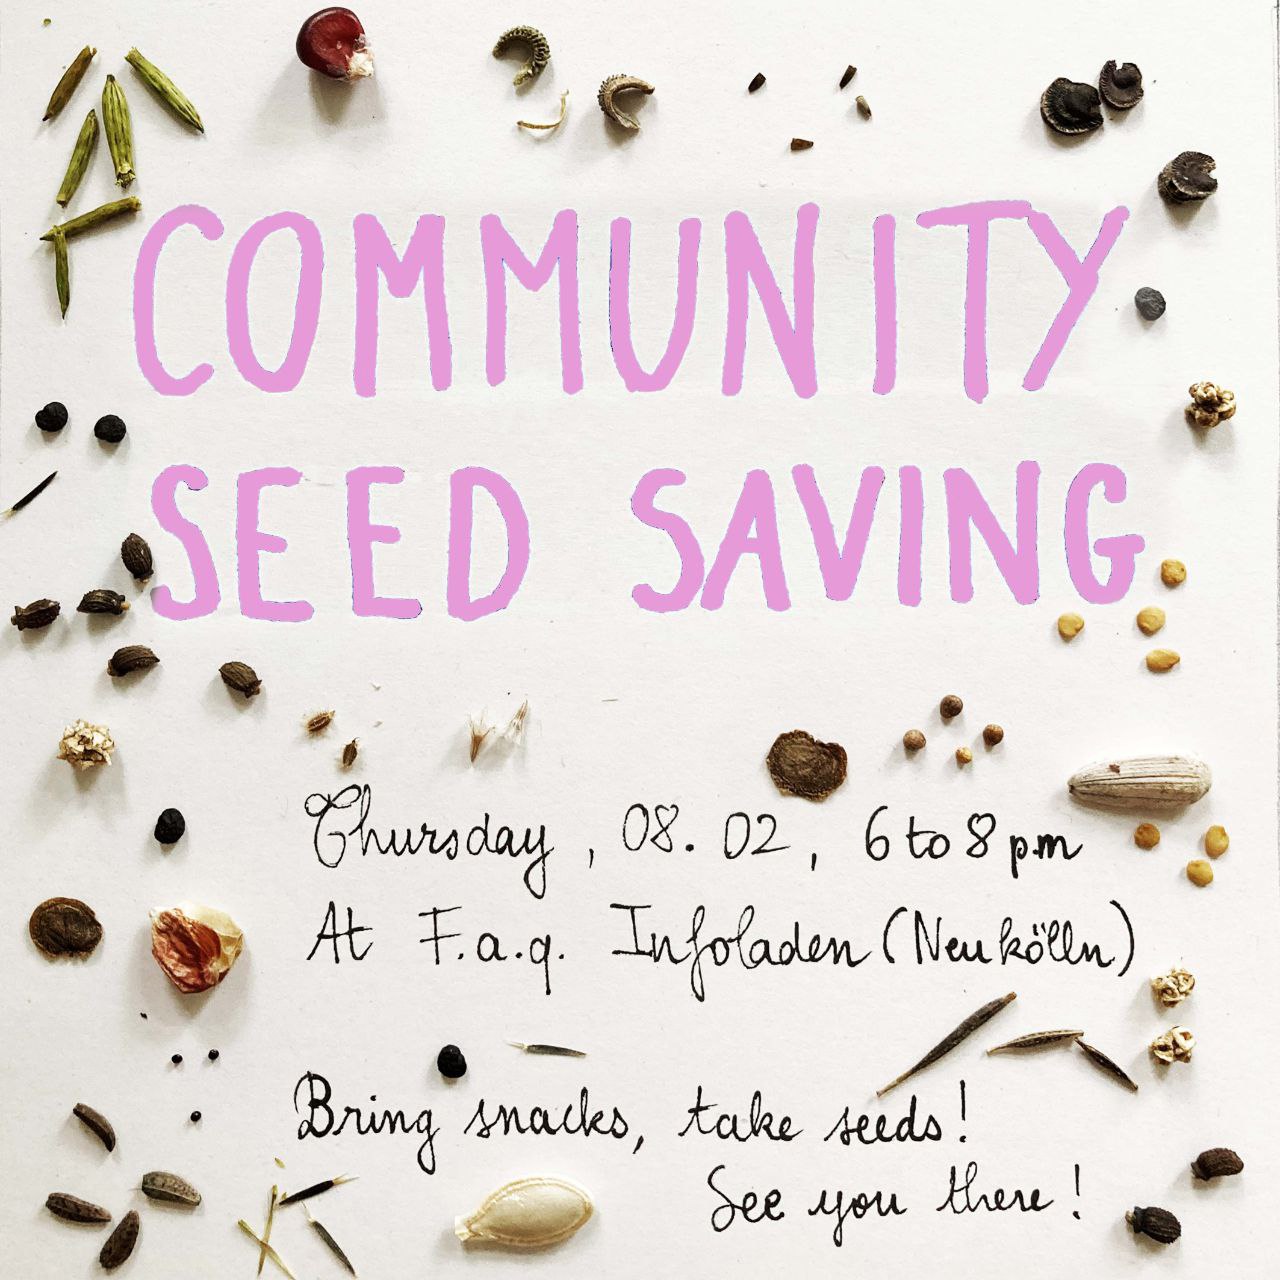 Community Seed Saving, Thursday 8th of February from 6 to 8 pm at f.a.q. Inoladen (Neukölln). Bring snacks, take seeds! See you there!